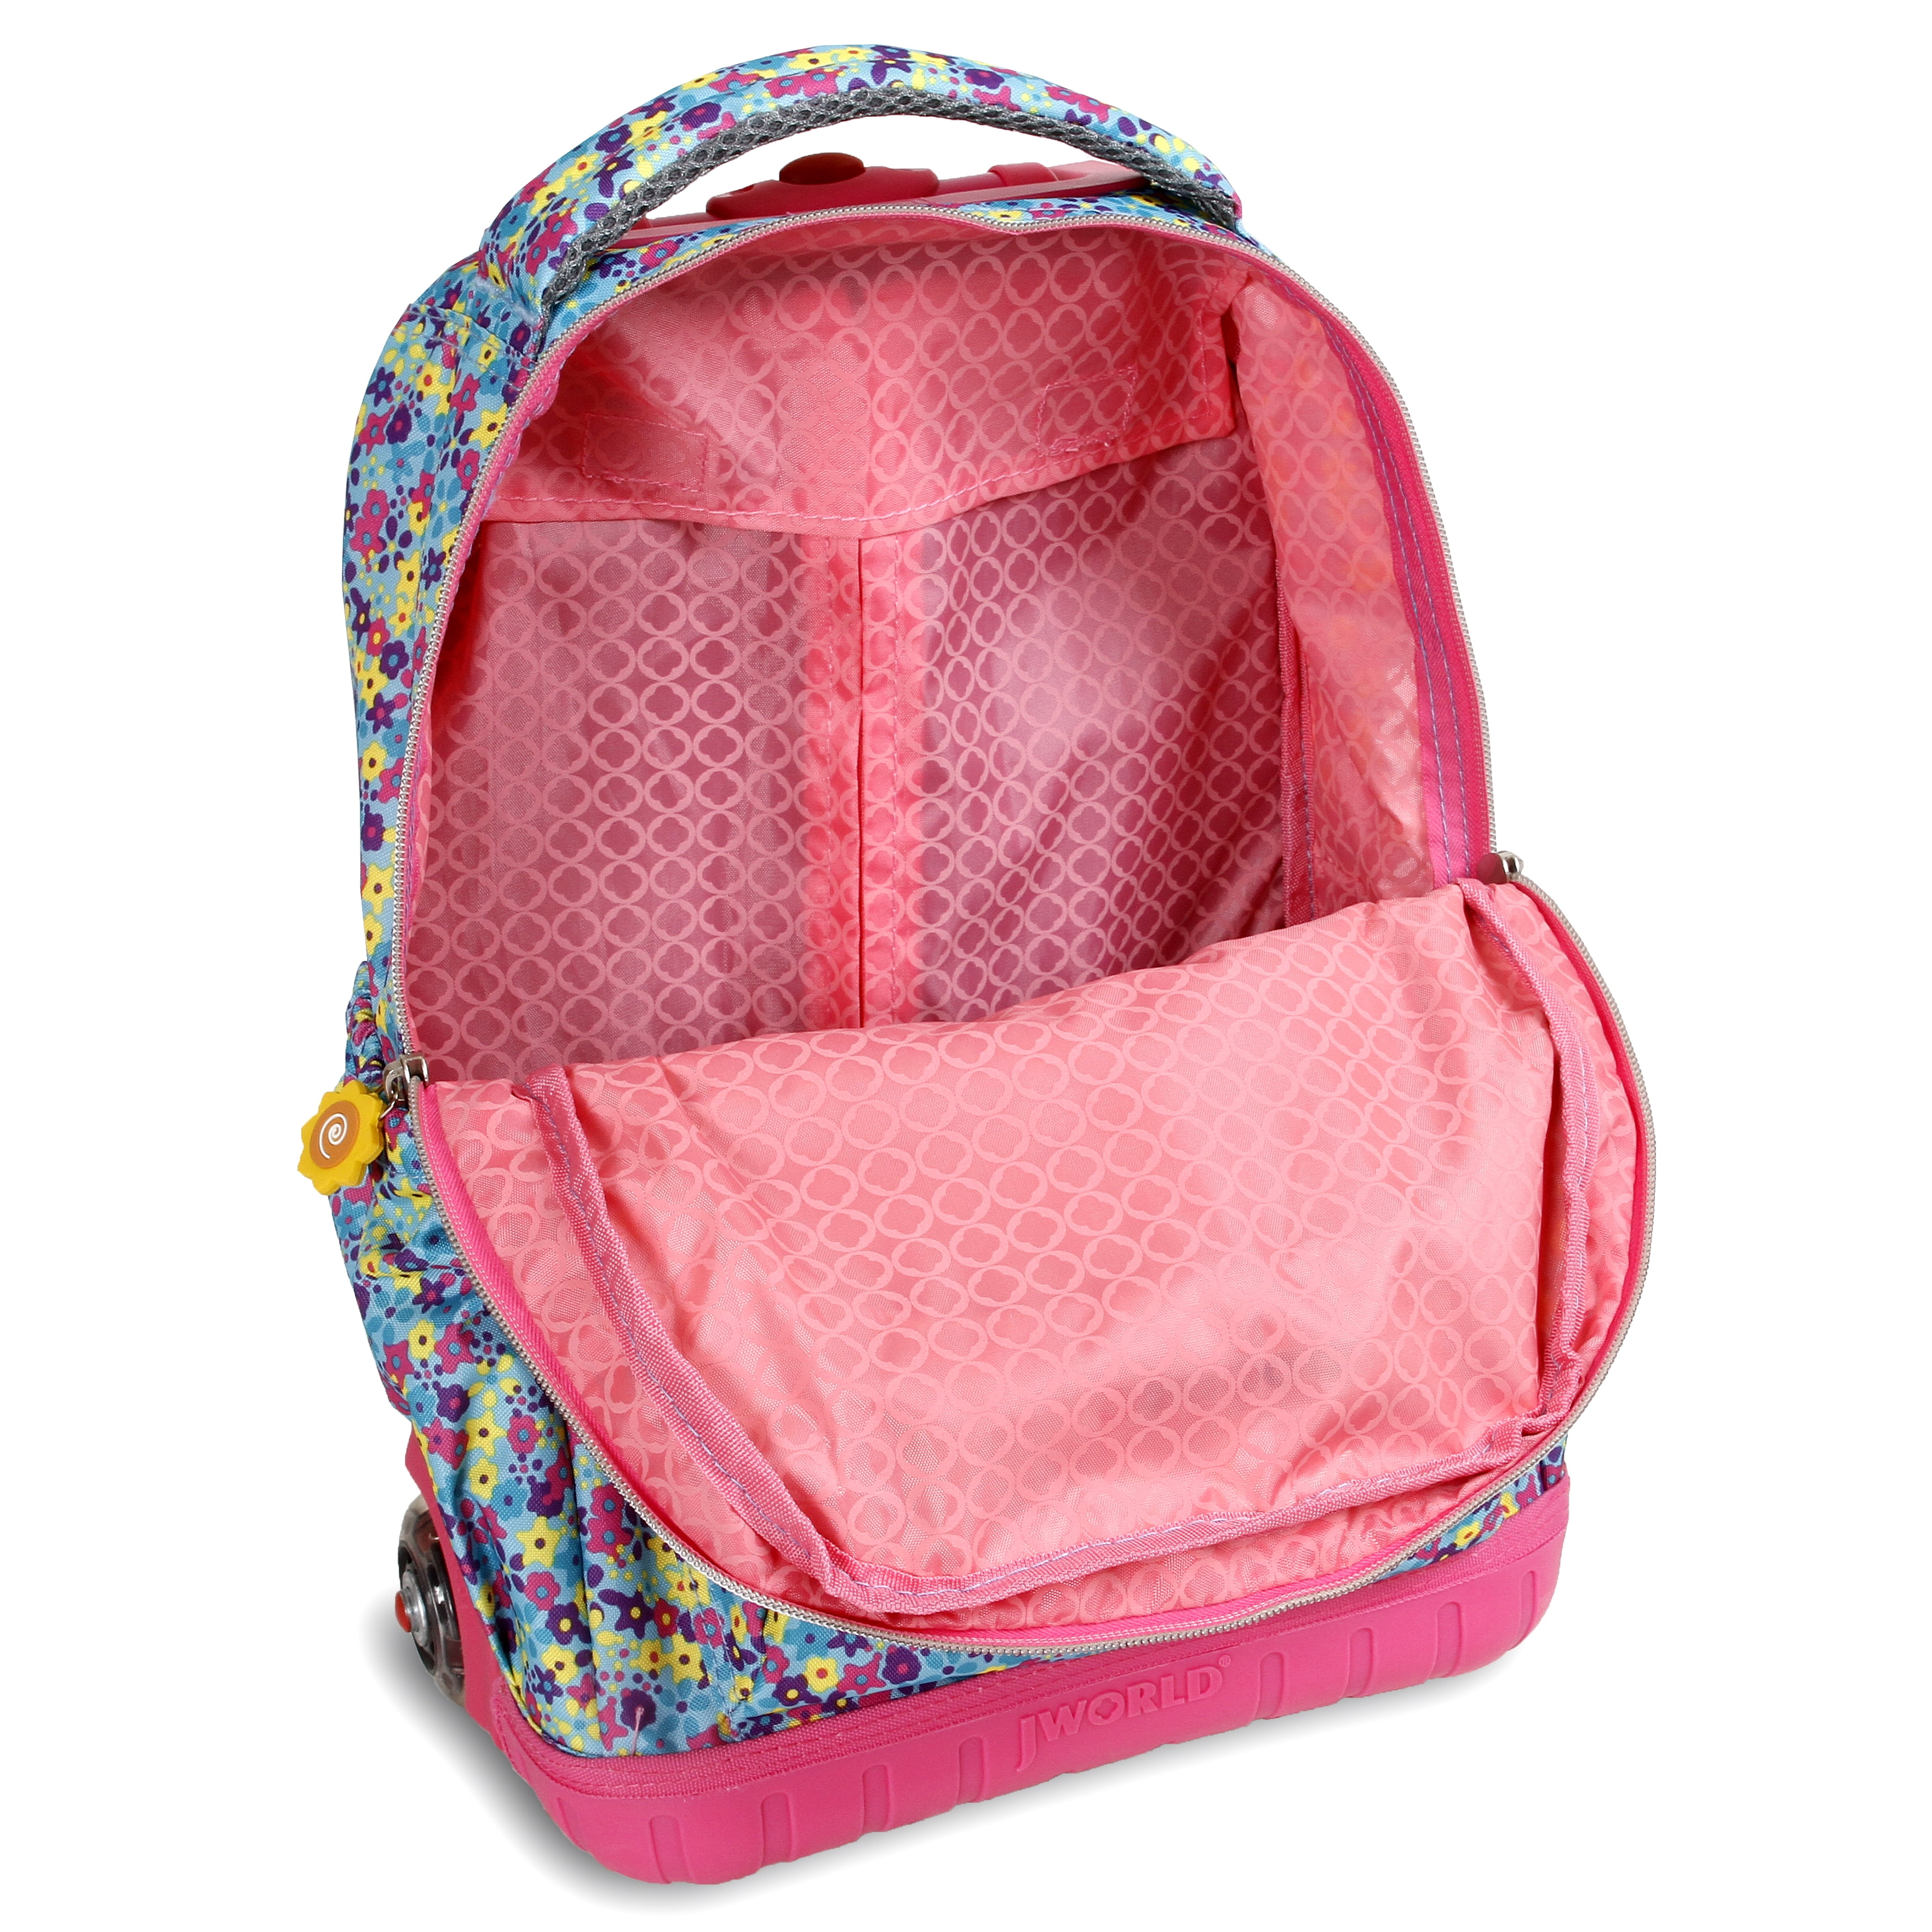 J World Lollipop Kids Rolling Backpack with Lunch Bag - Candy Buttons